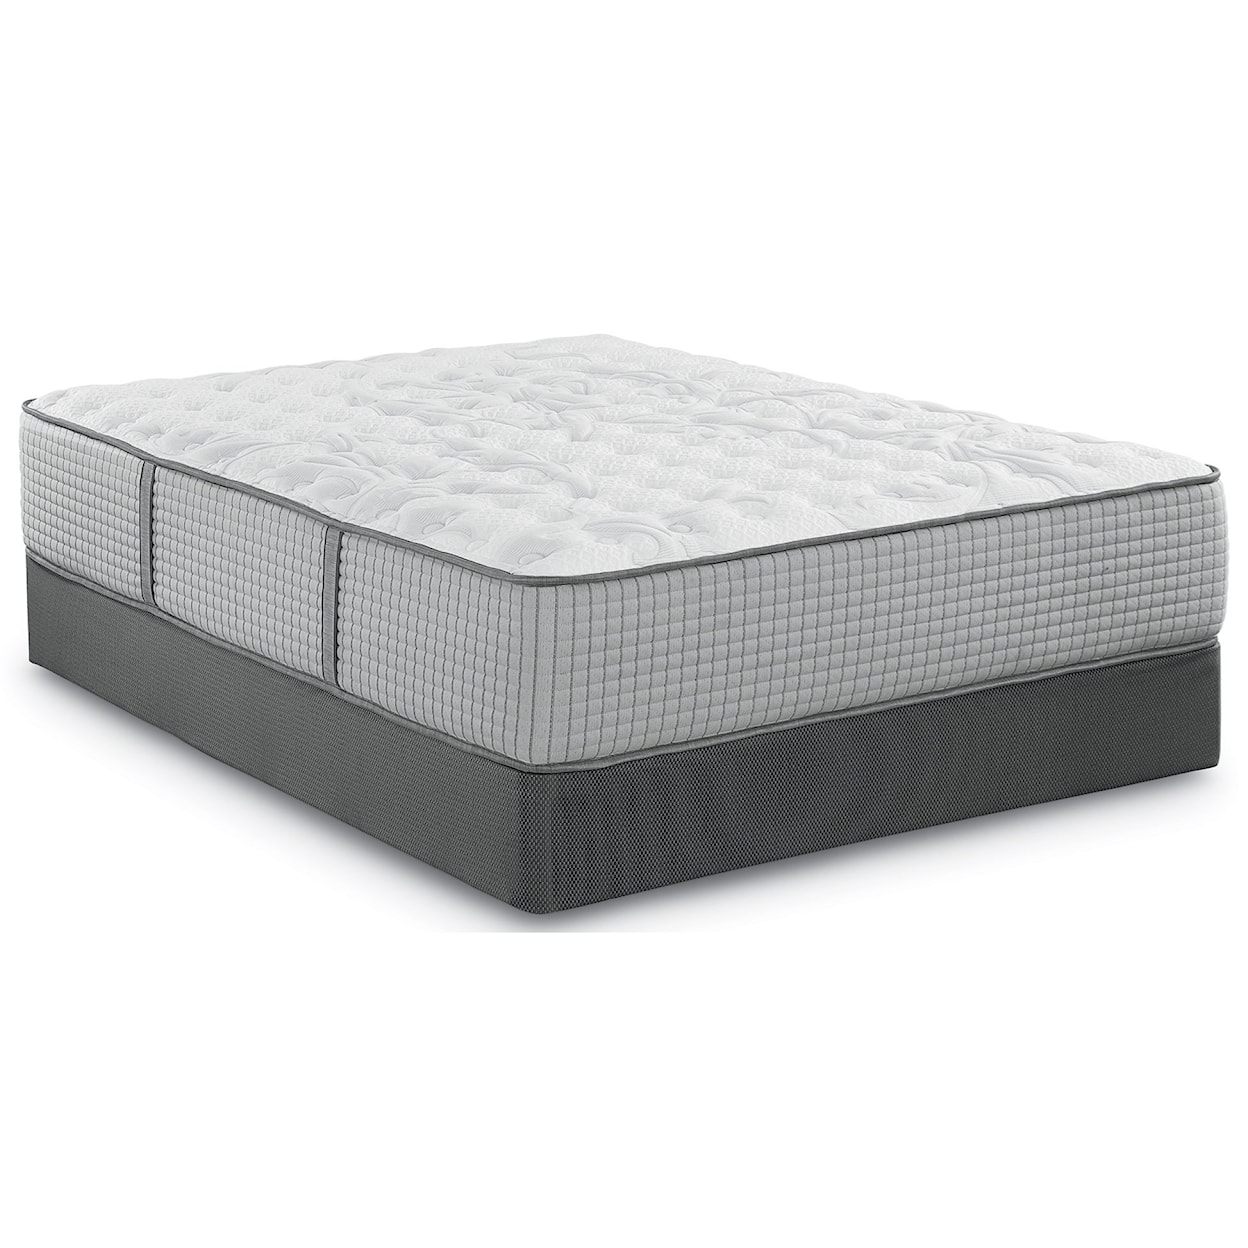 Restonic Biltmore House Firm Full Firm Coil on Coil Mattress Set